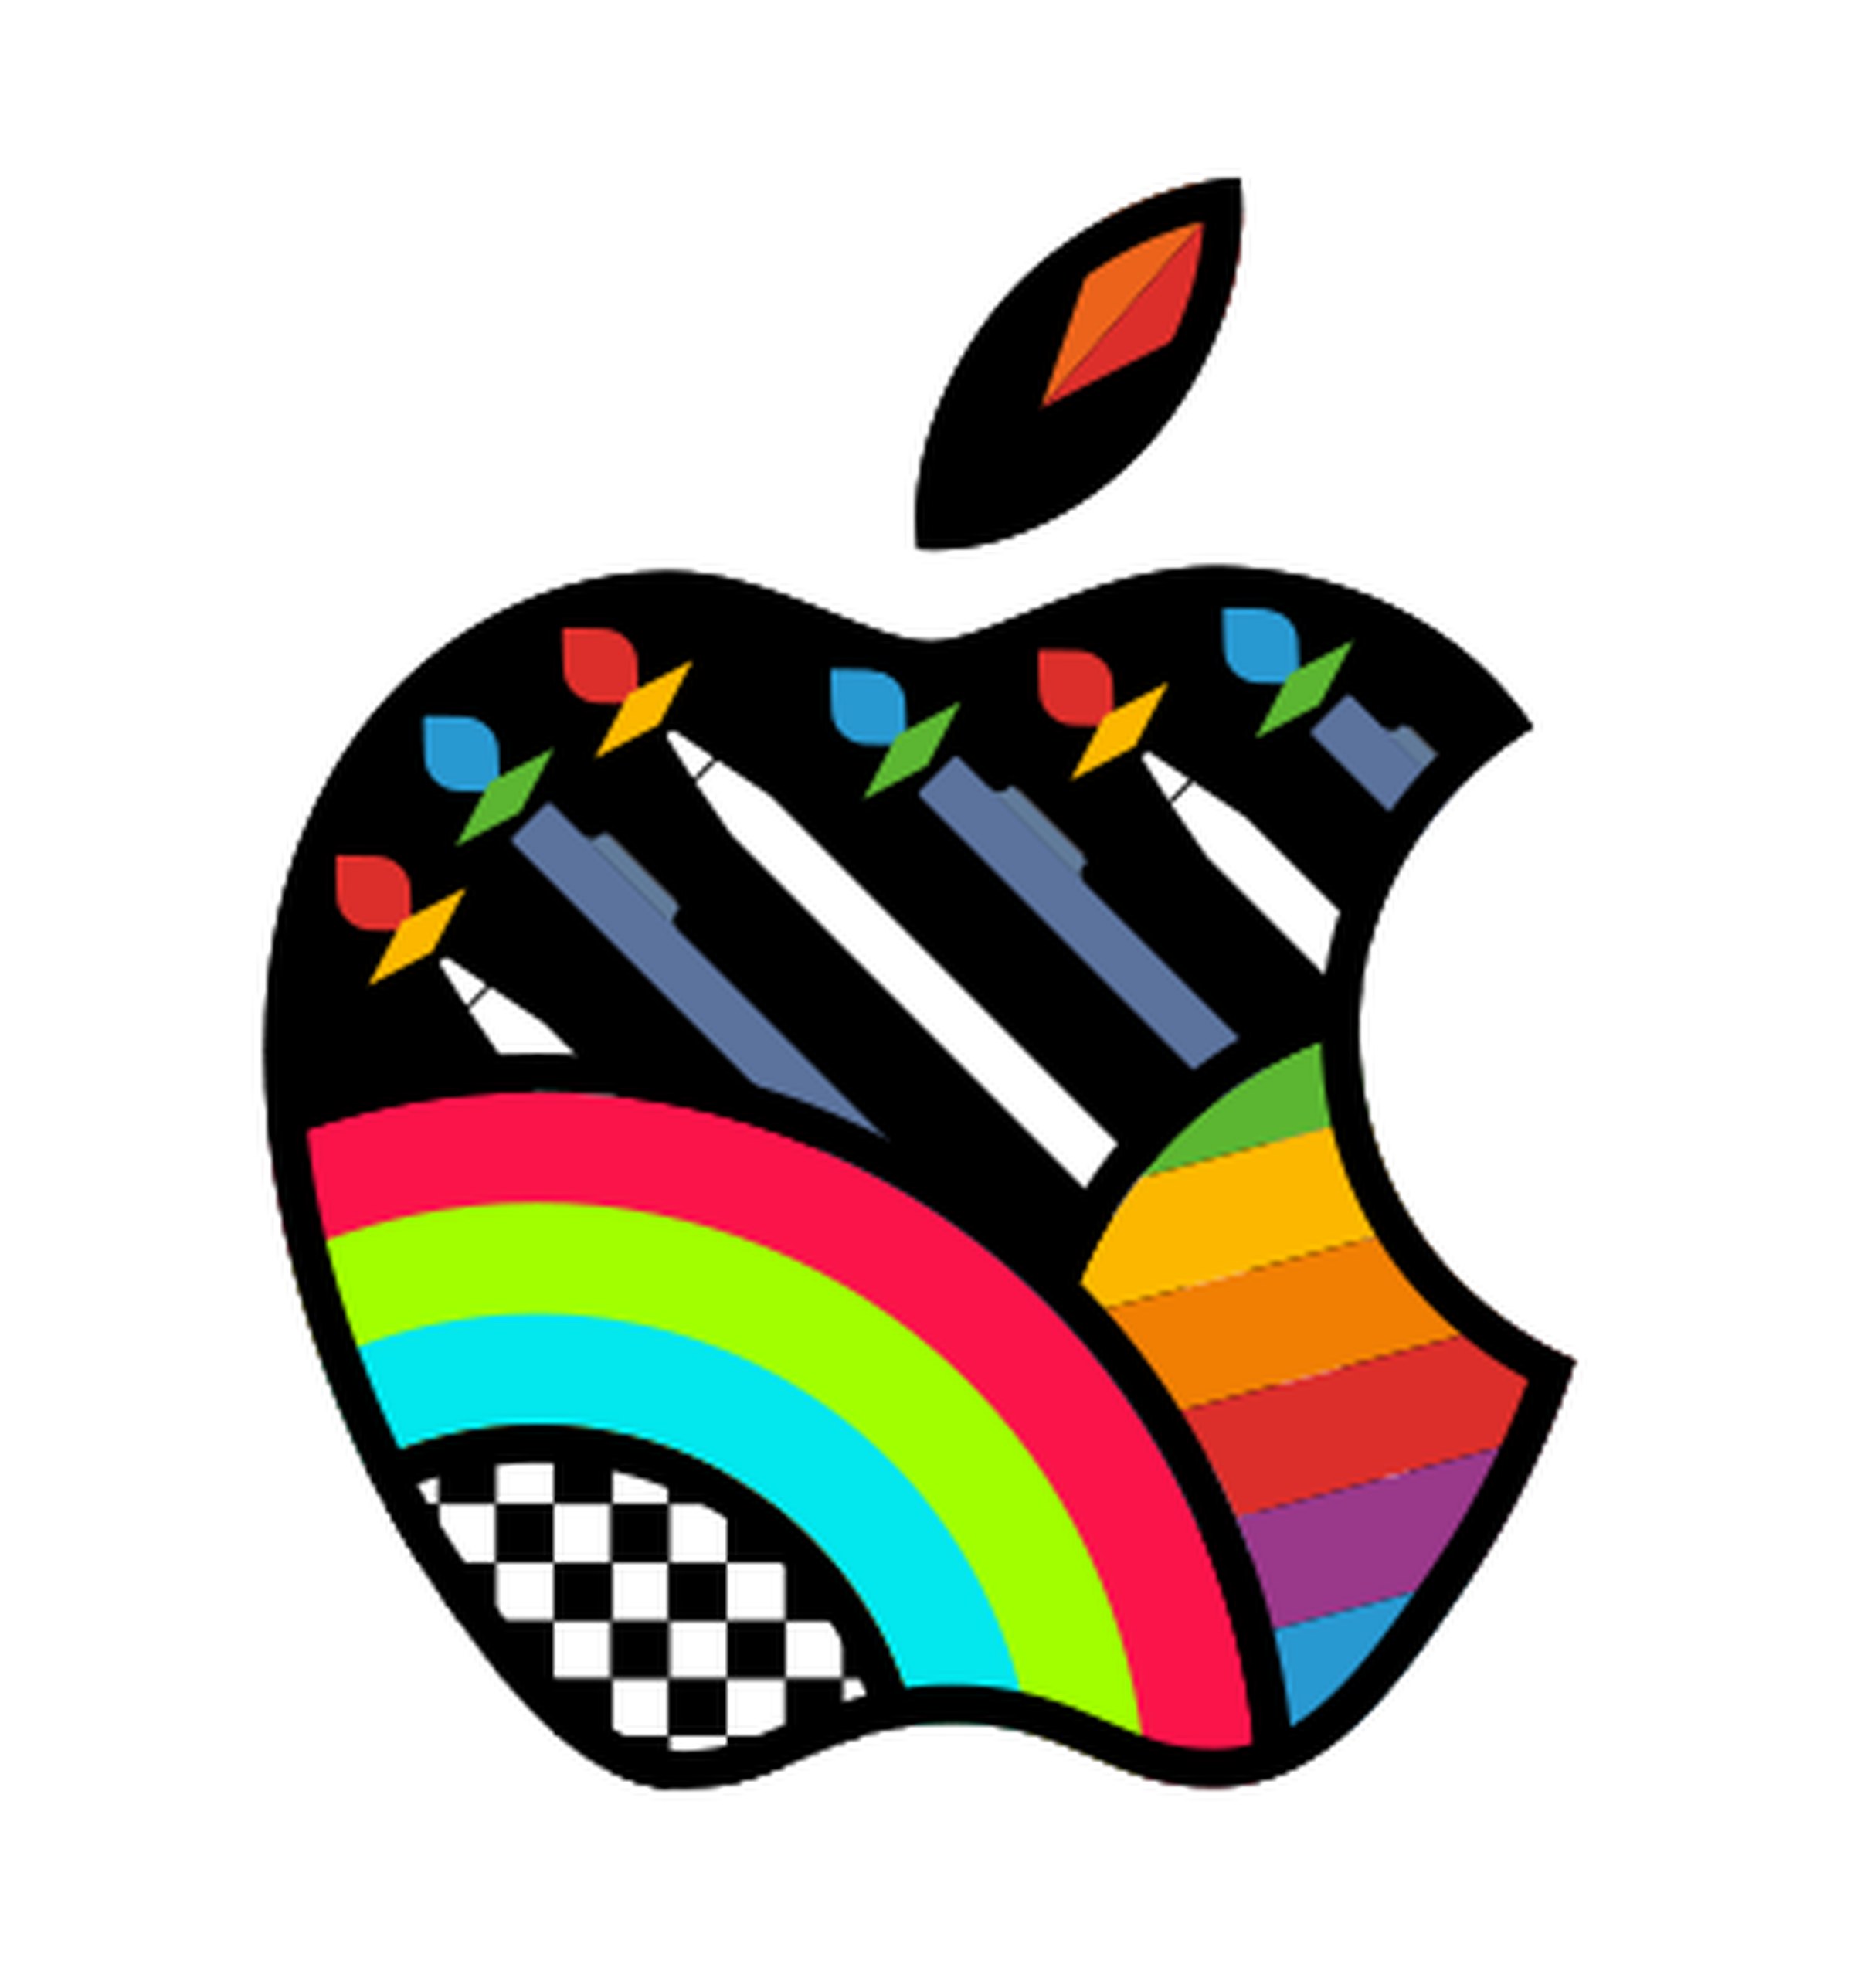 Apple’s logo for its new store in Mumbai.